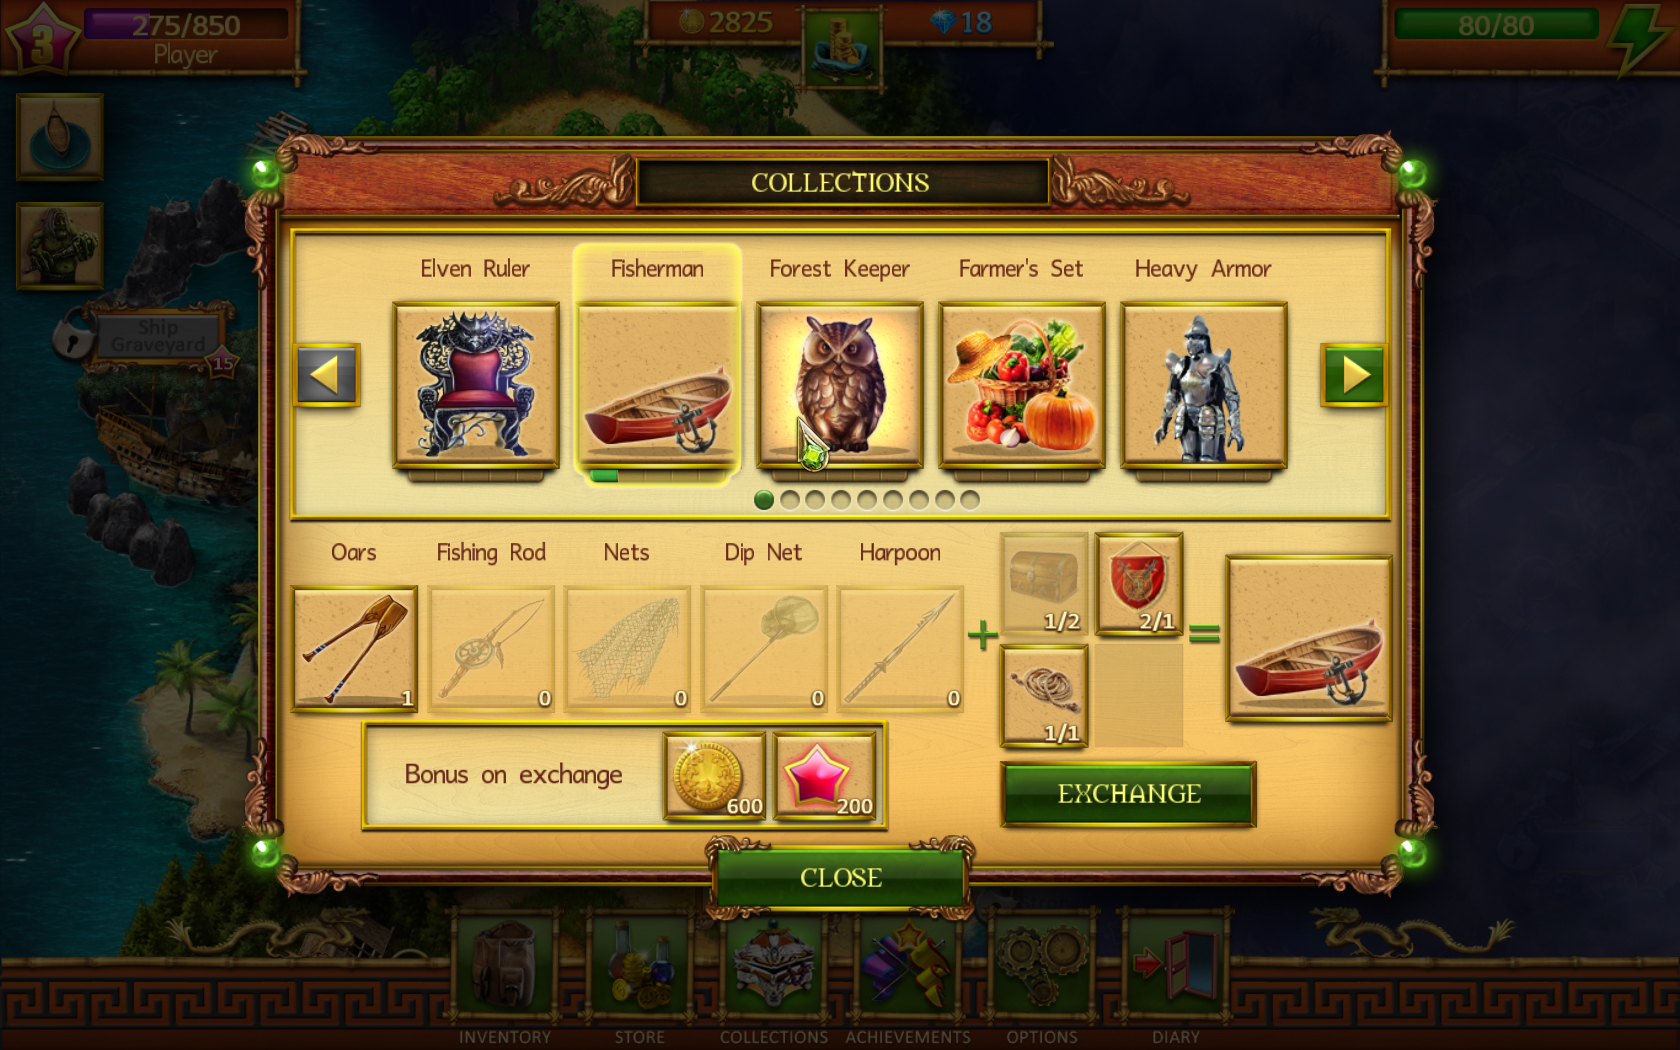 free for ios instal Lost Lands: Mahjong